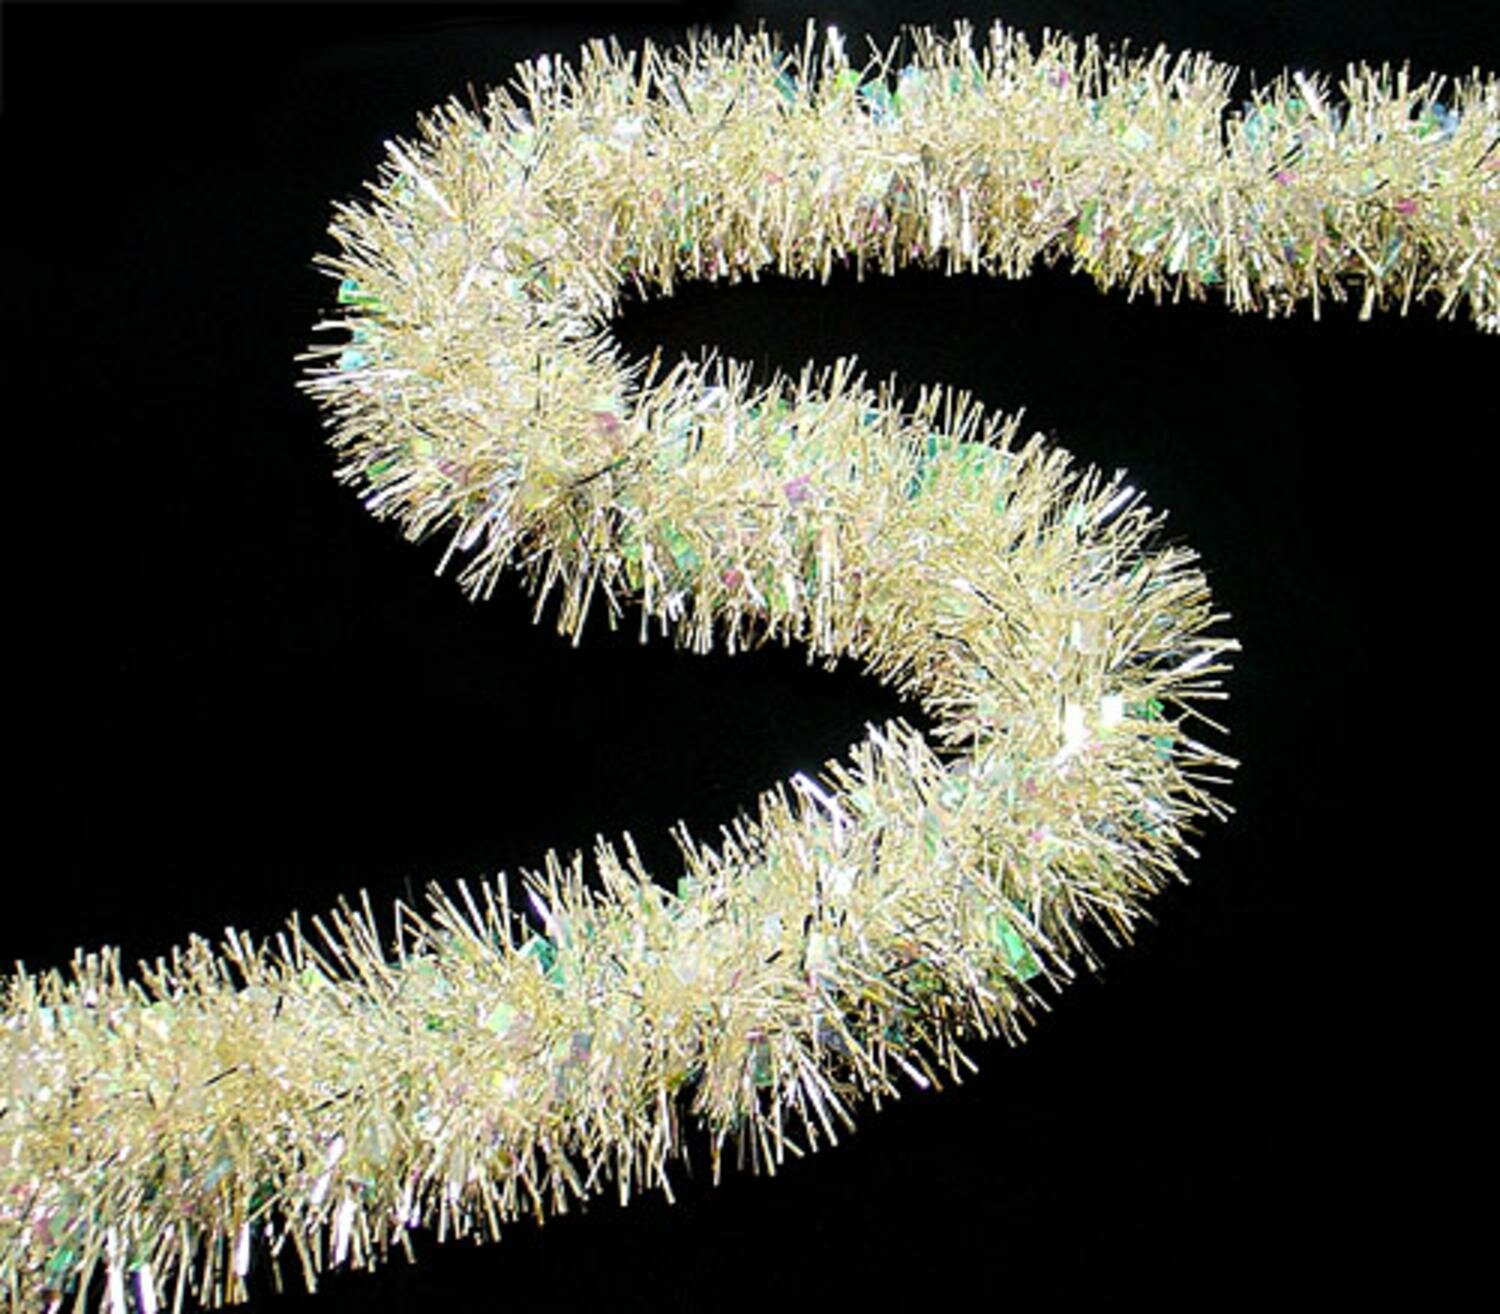 12' x 3 Silver and White Iridescent Tinsel Garland with Silver Snowflakes  - Unlit 